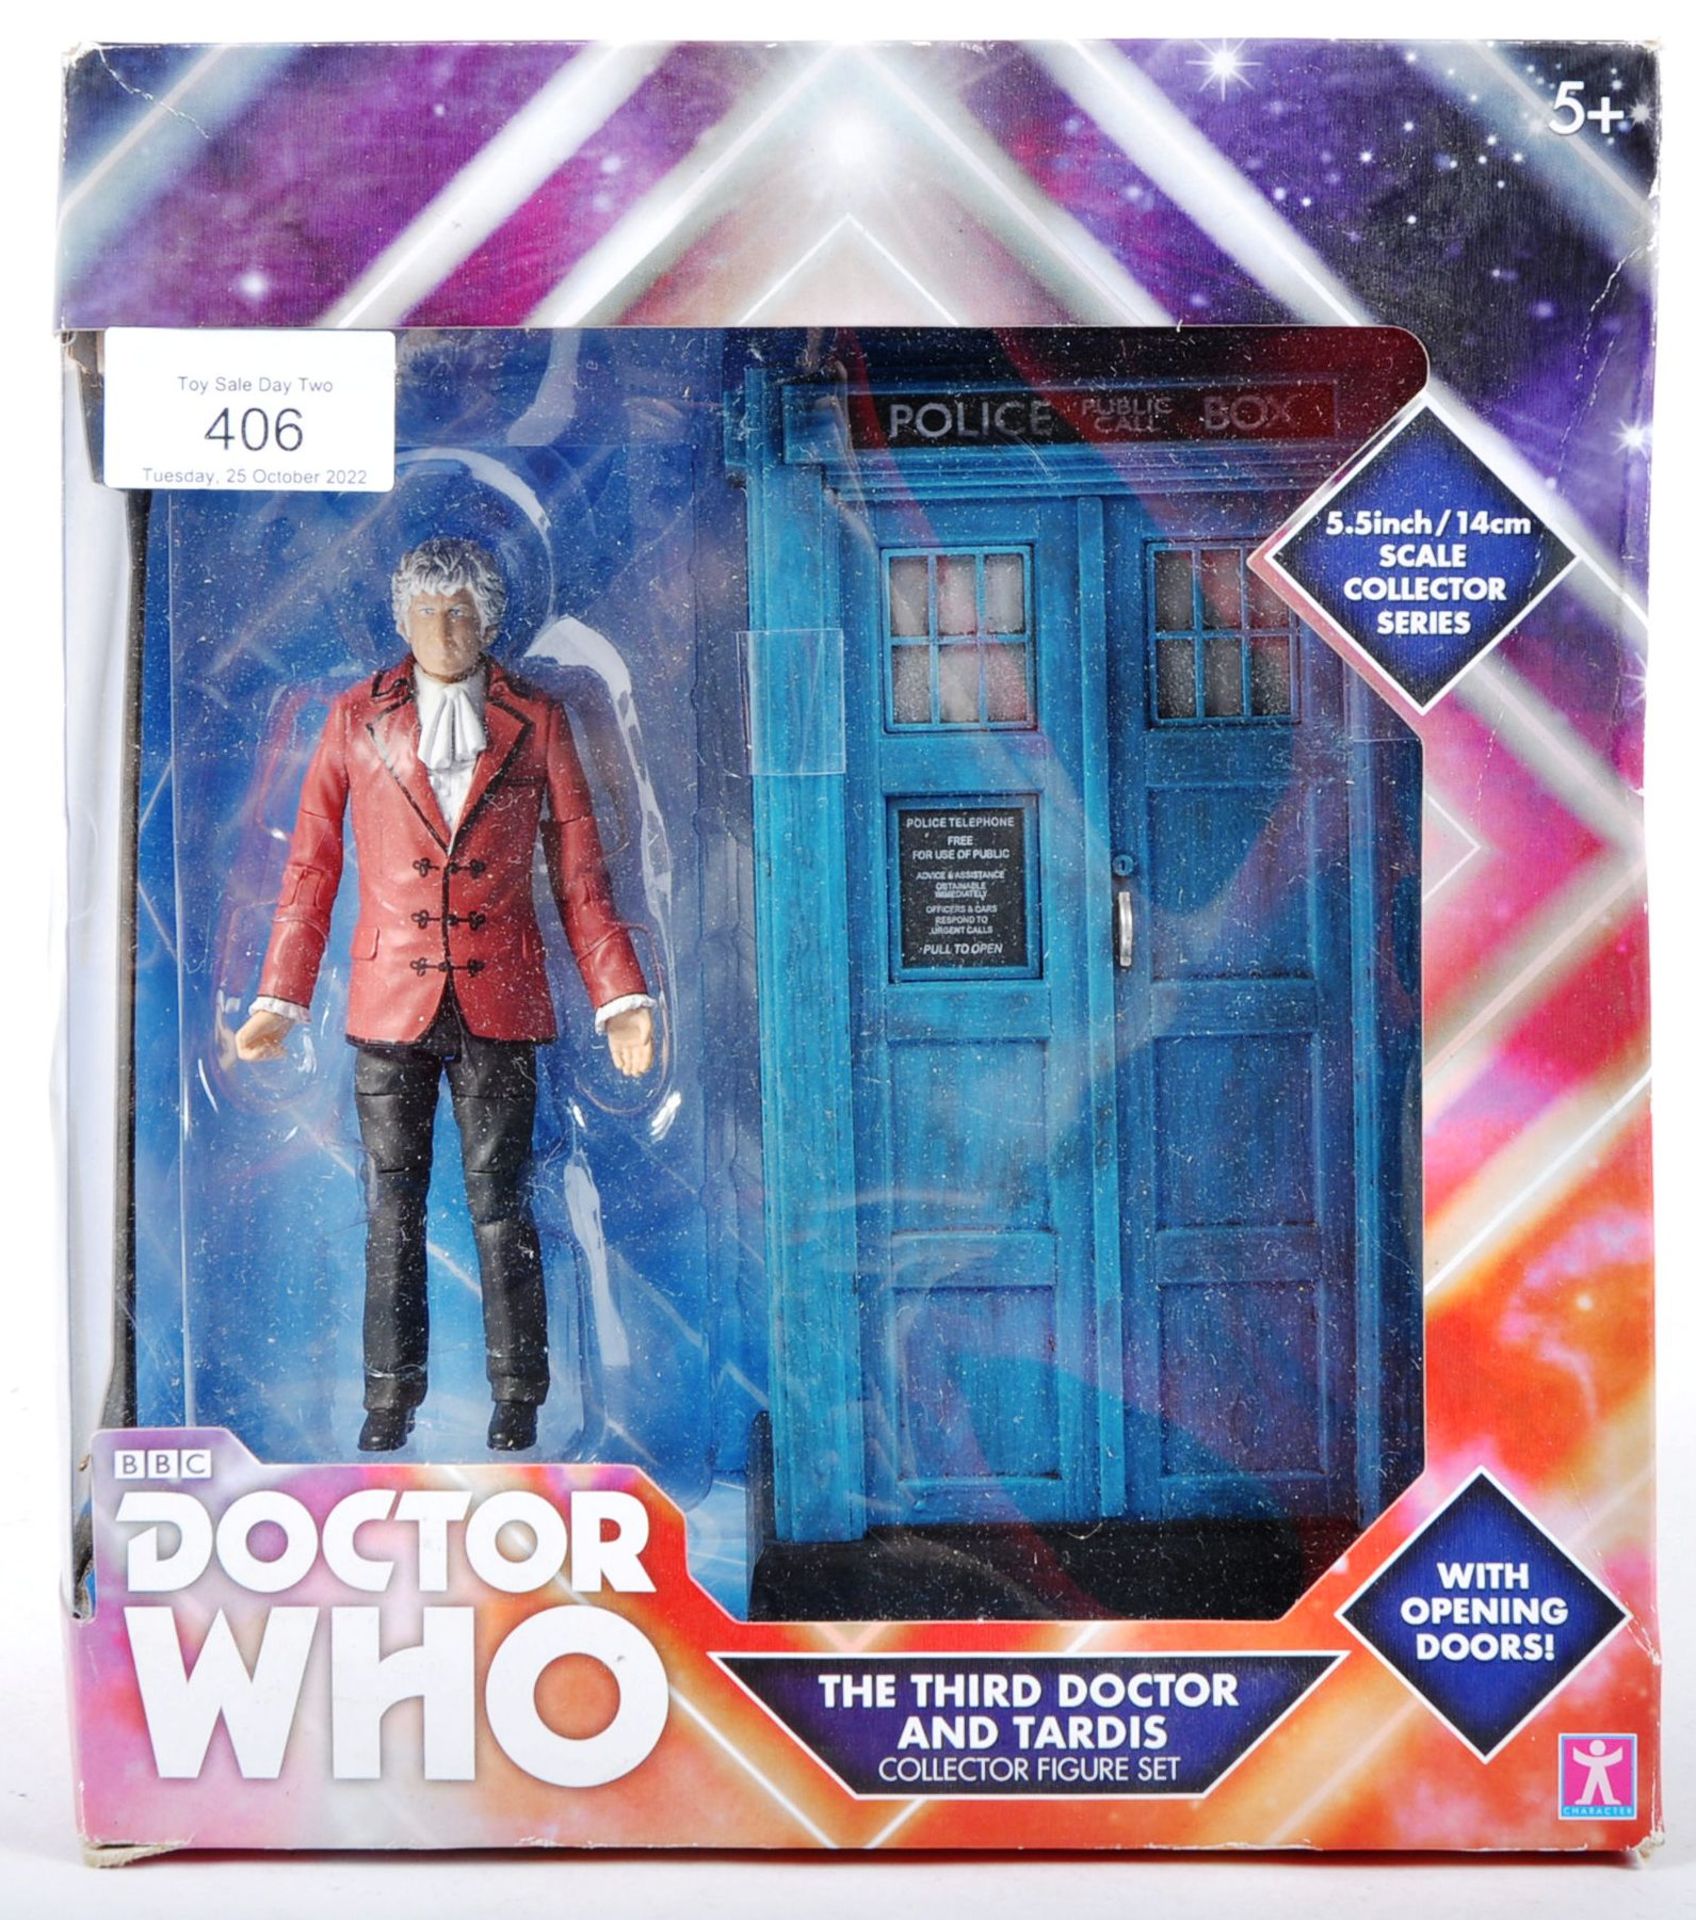 DOCTOR WHO - CHARACTER OPTIONS - THIRD DOCTOR TARDIS SET